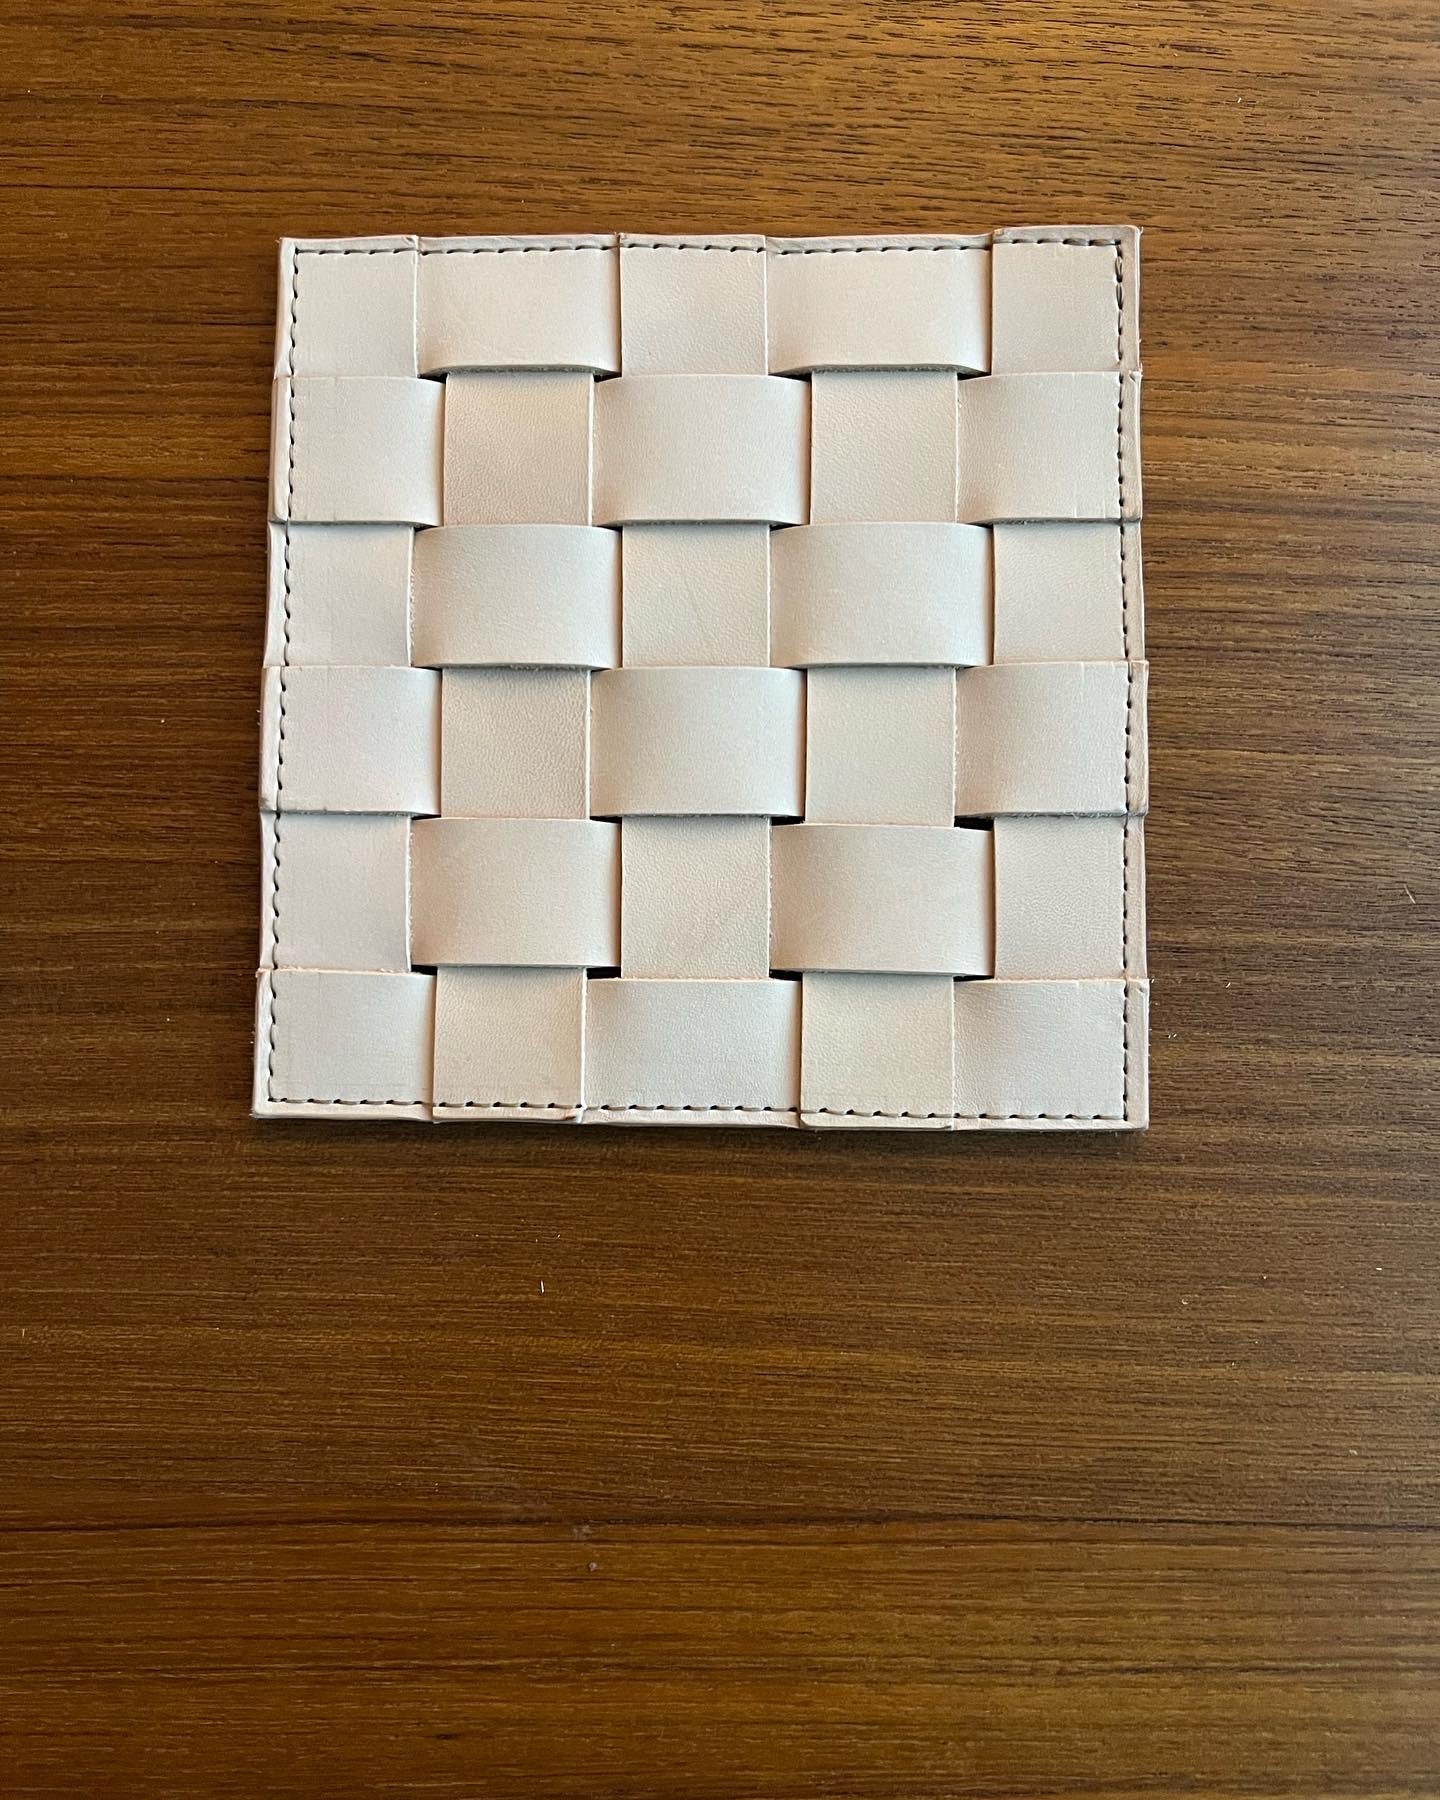 Pristine, nude leather trivet made of woven strips sits on wood table top.